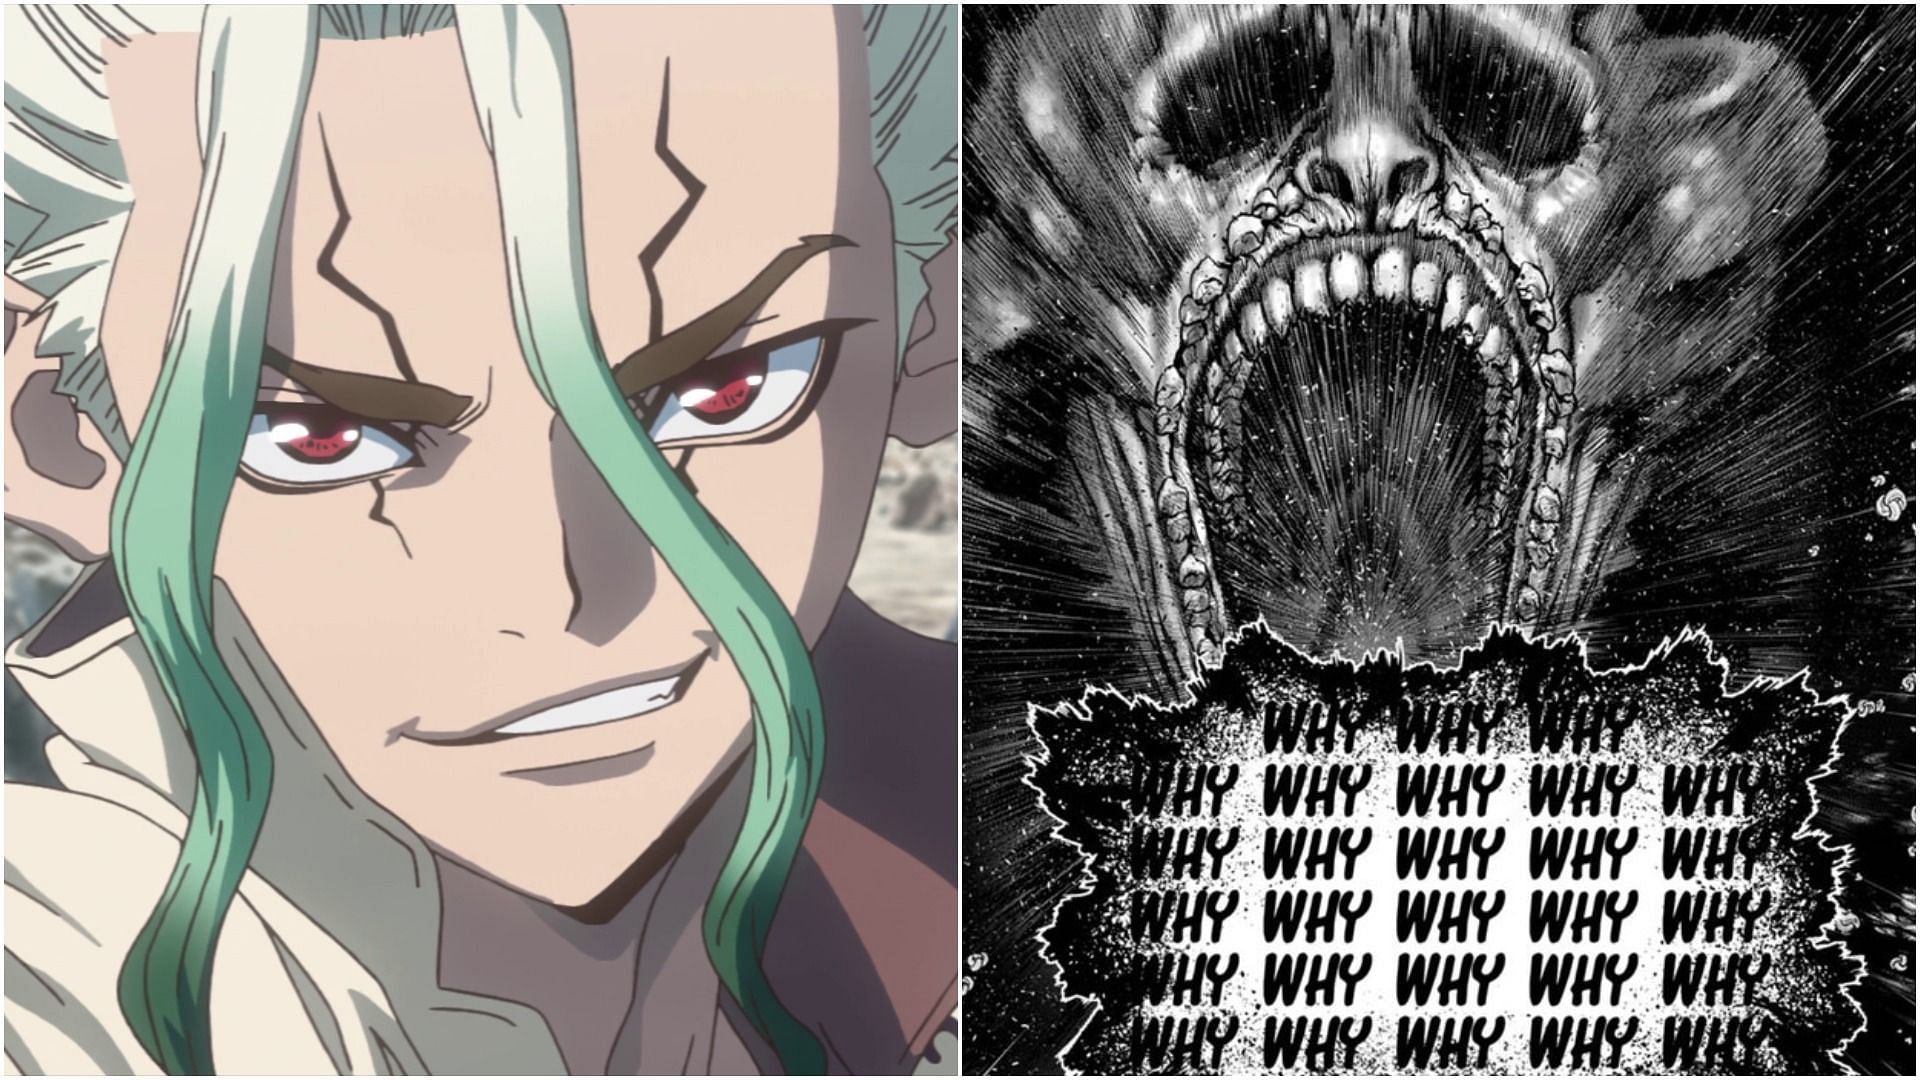 Senku and Why-man star in Dr. Stone Chapter 229